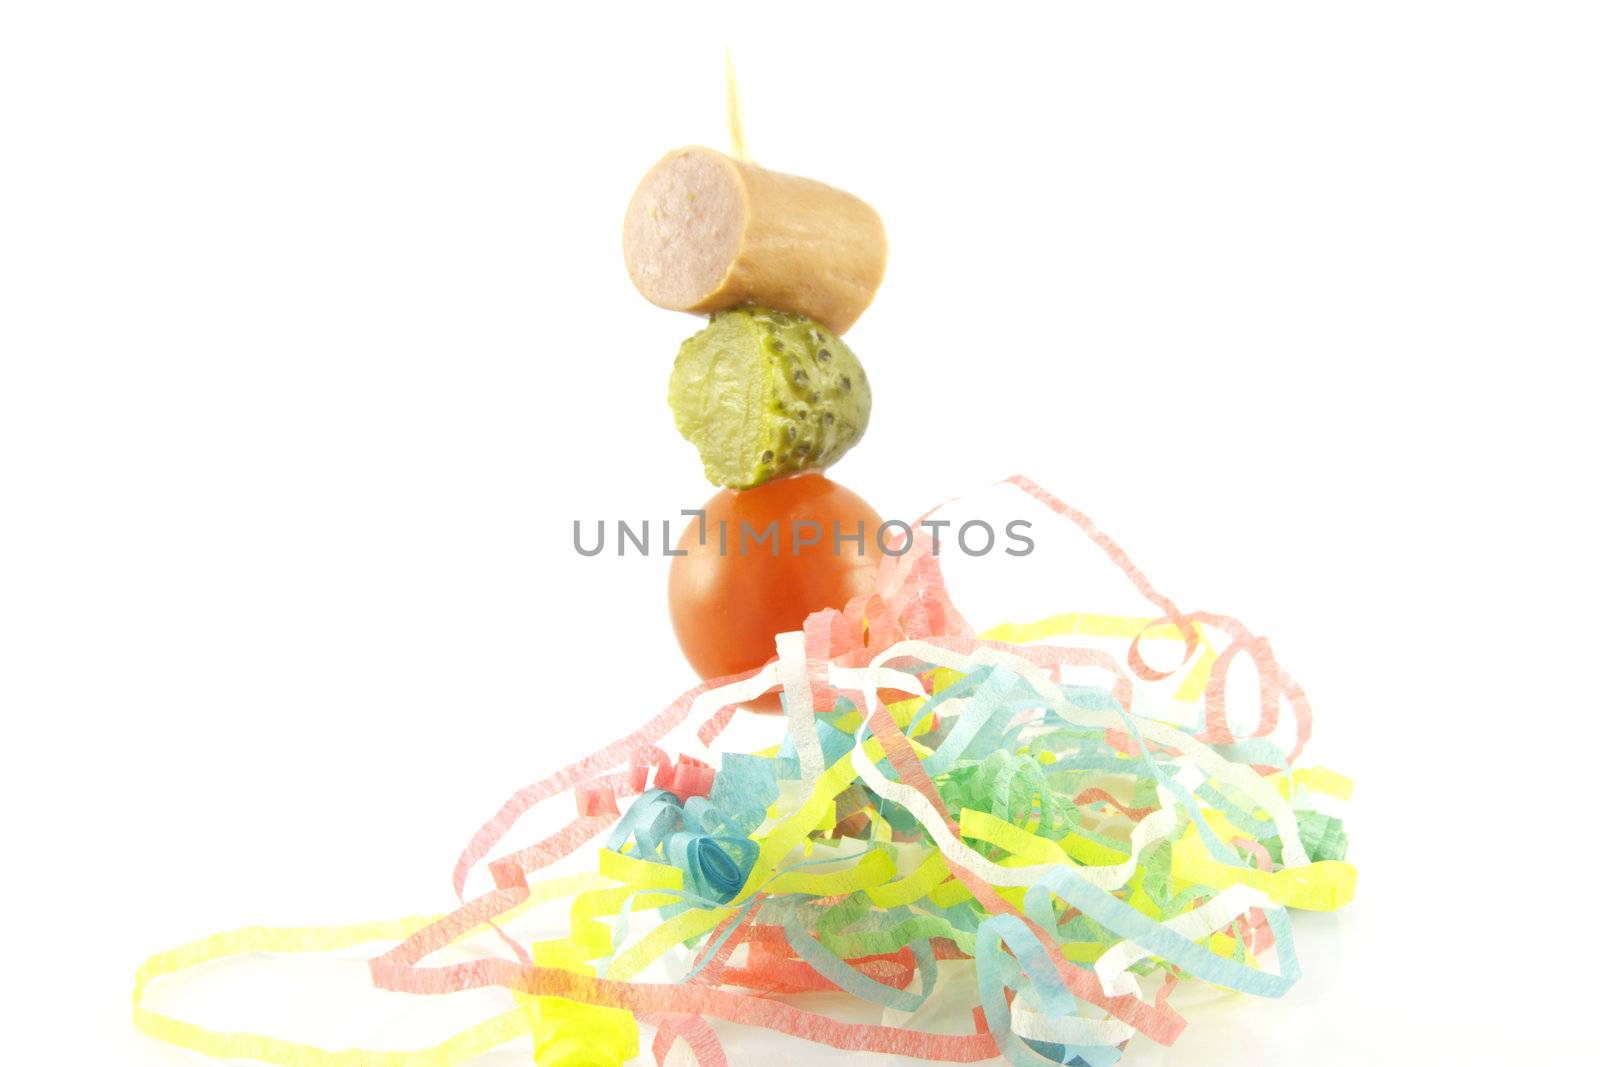 Single cocktail stick with sauage, gherkin and small red tomato with coloured streamer on a reflective white background